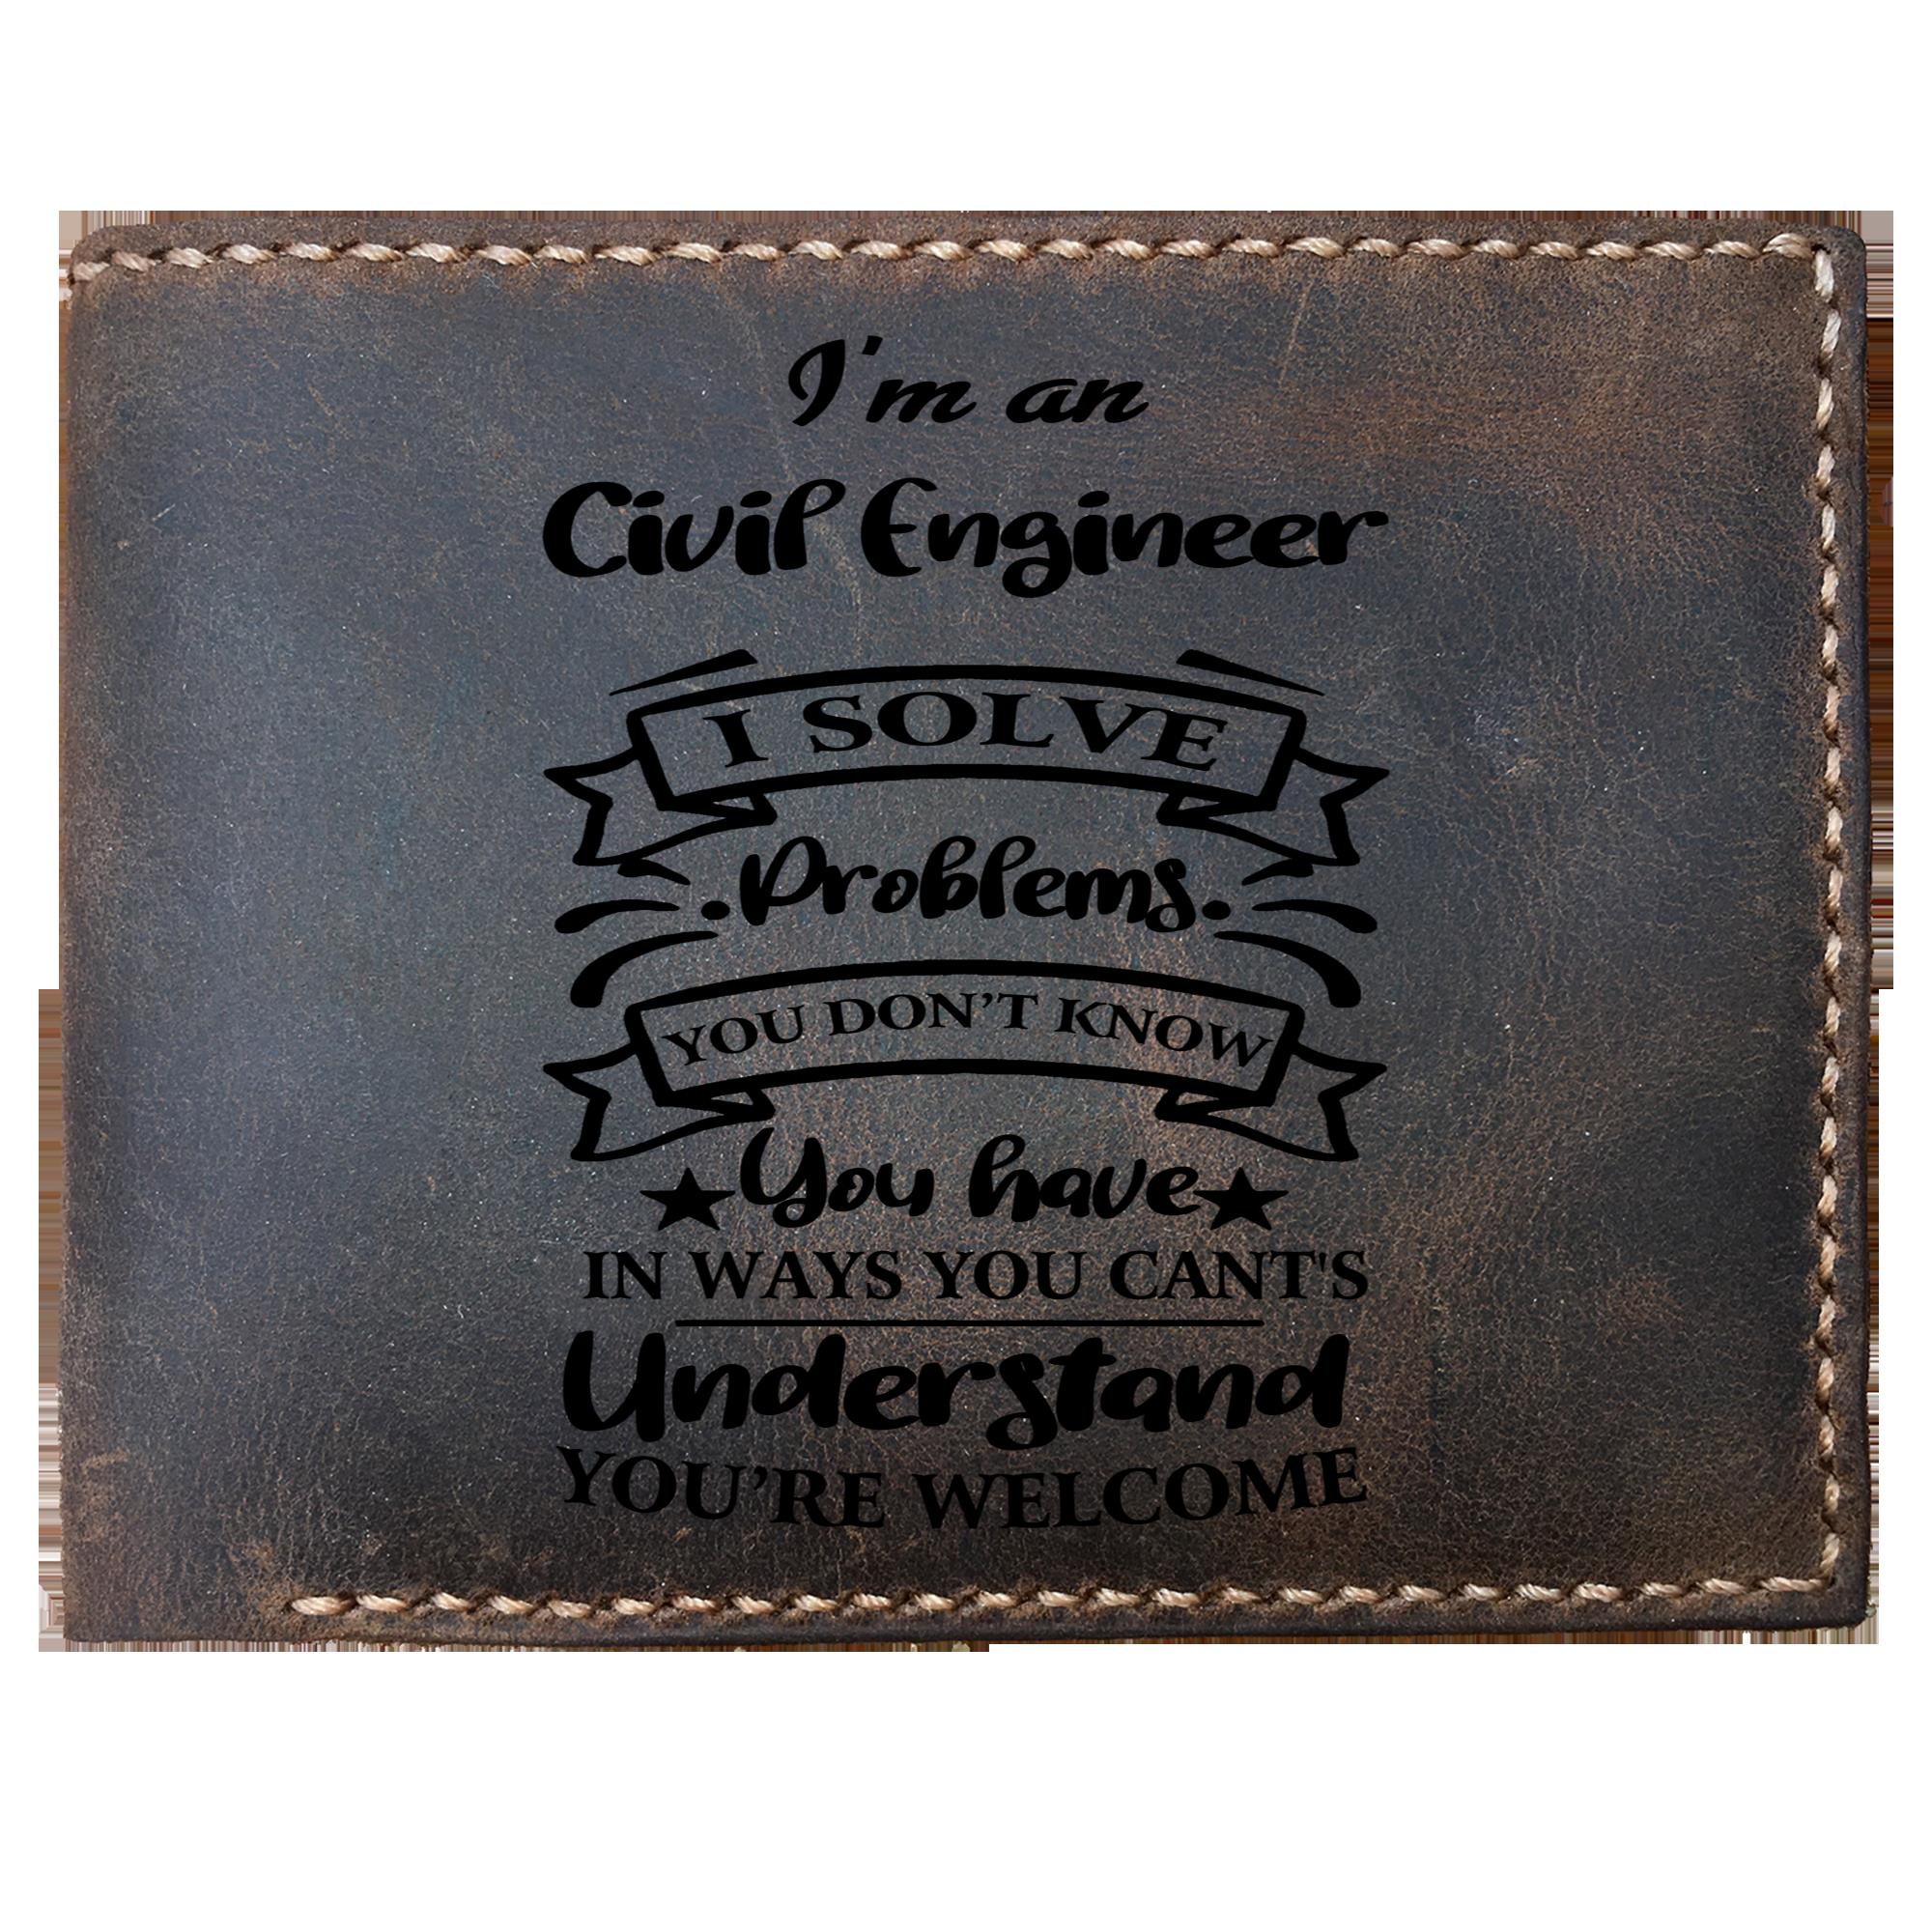 Skitongifts Funny Custom Laser Engraved Bifold Leather Wallet For Men, I'm an Civil Engineer Solve Problems, Father's Day Gifts